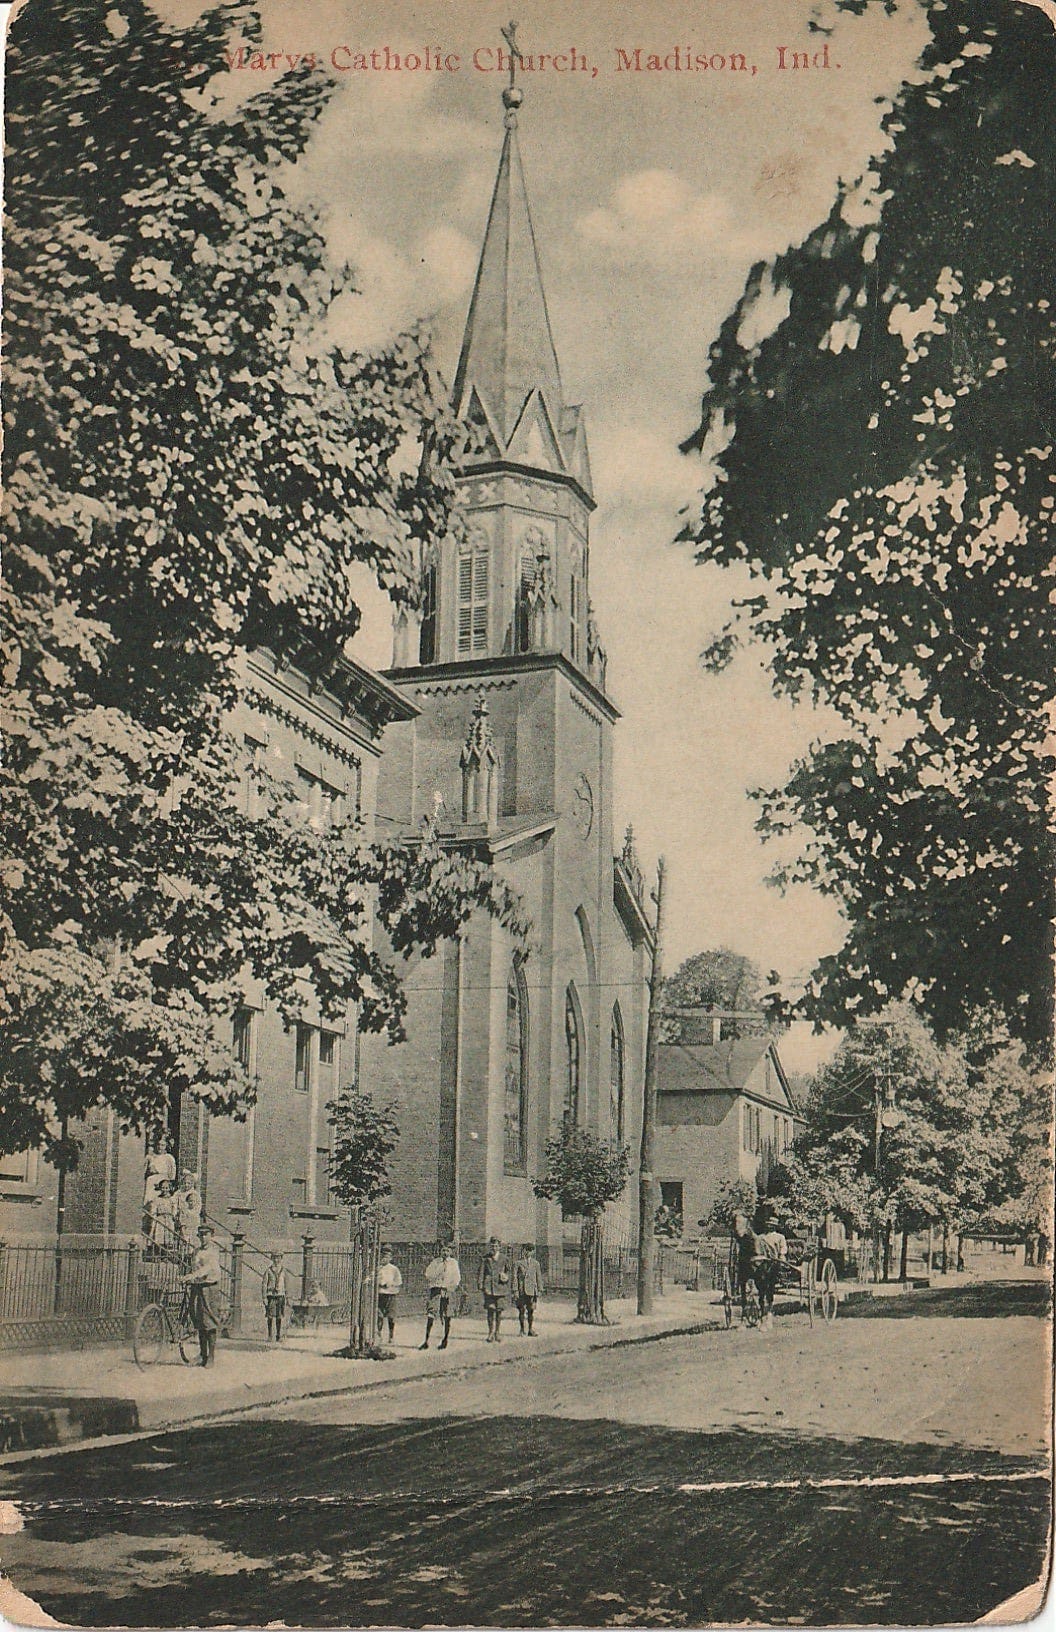 postcard of St. Mary's Catholic Church in Madison